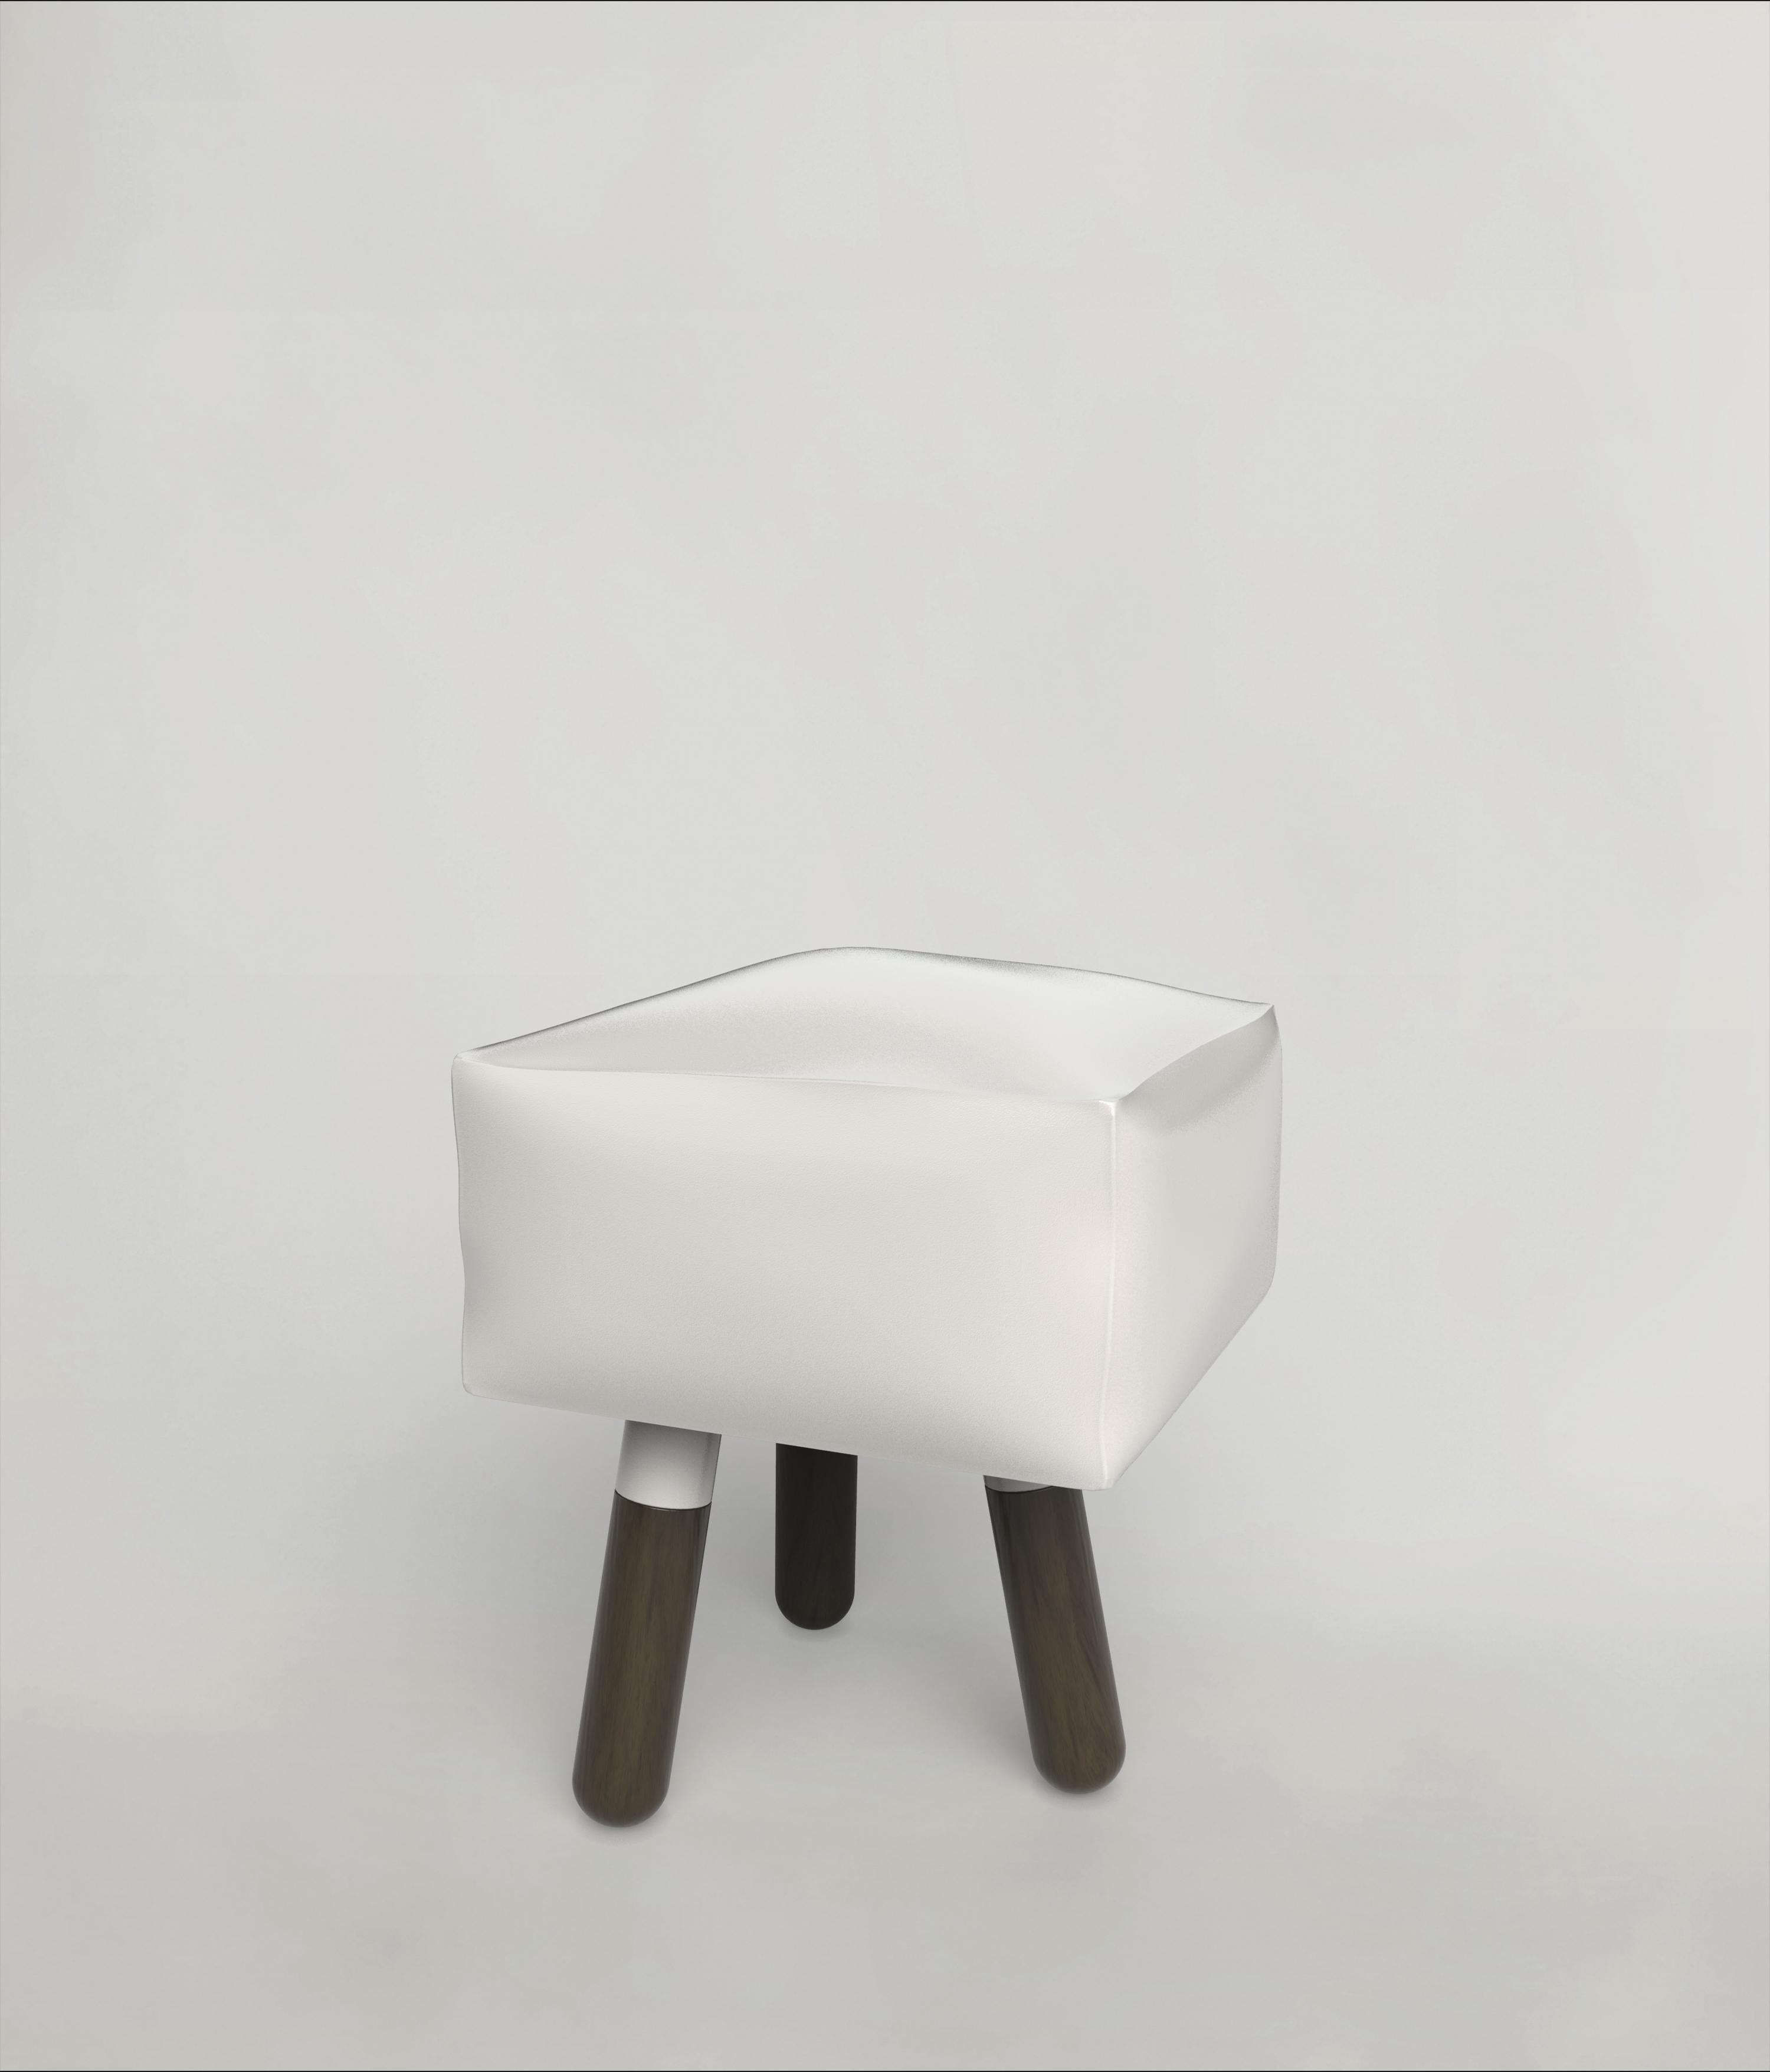 Icenine V2 Stool by Edizione Limitata
Limited Edition of 15+3 AP. Signed and numbered.
Dimensions: D35 x W35 x H41 cm
Materials: polished painted brass+ dark oak solid wood

This 21st century brass stool is a product of Italian craftmanship,